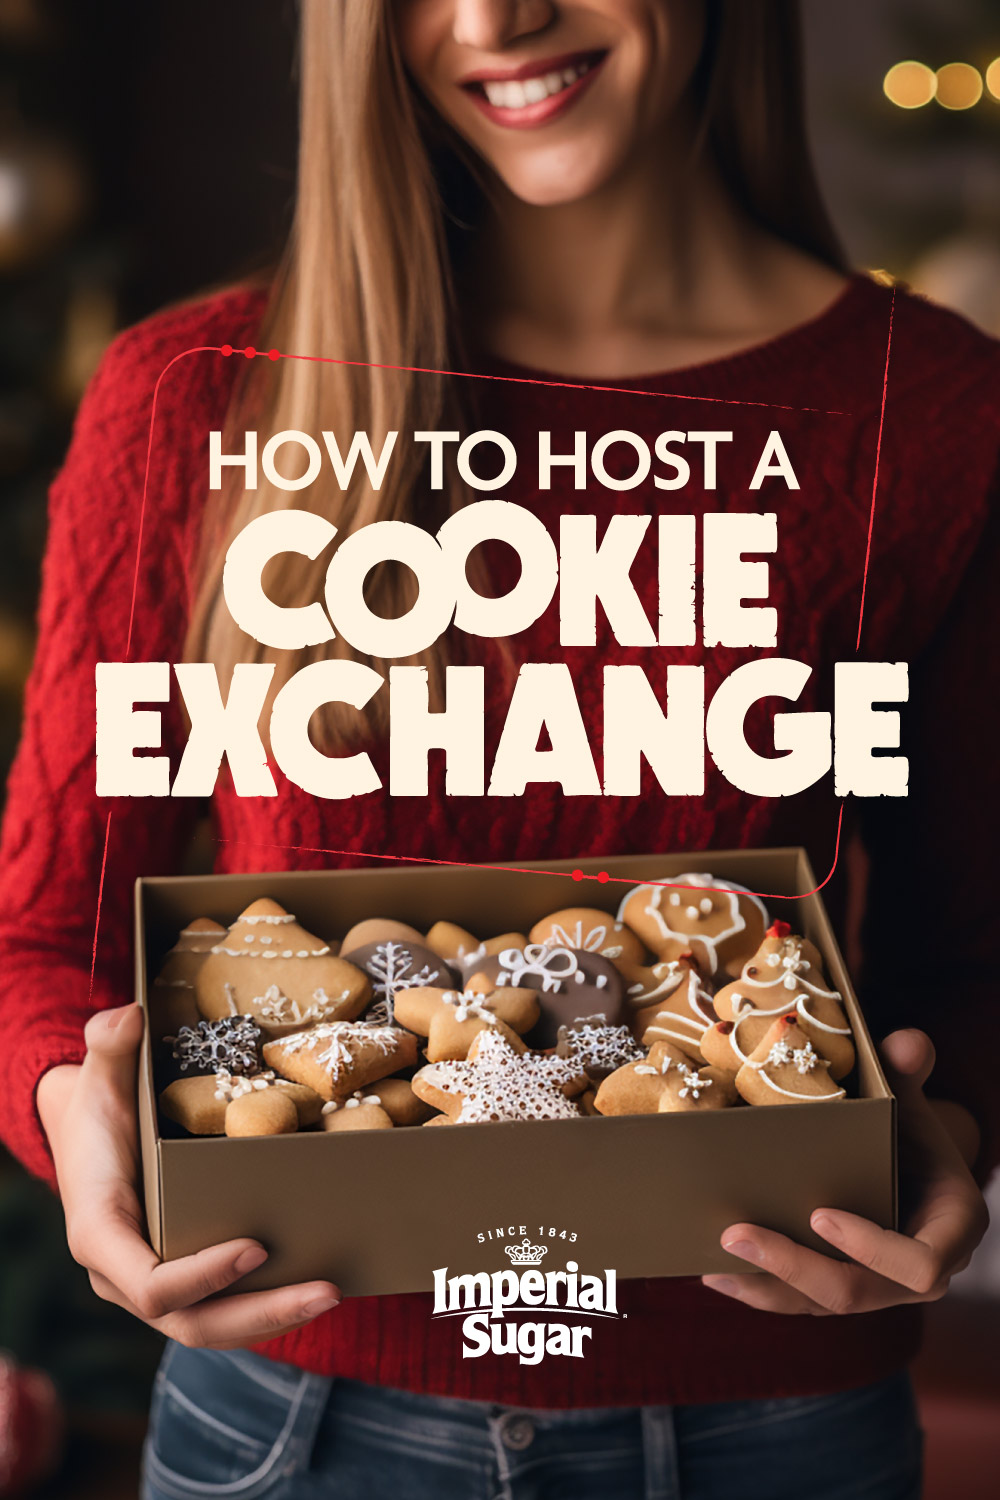 "how to host a cookie exchange"